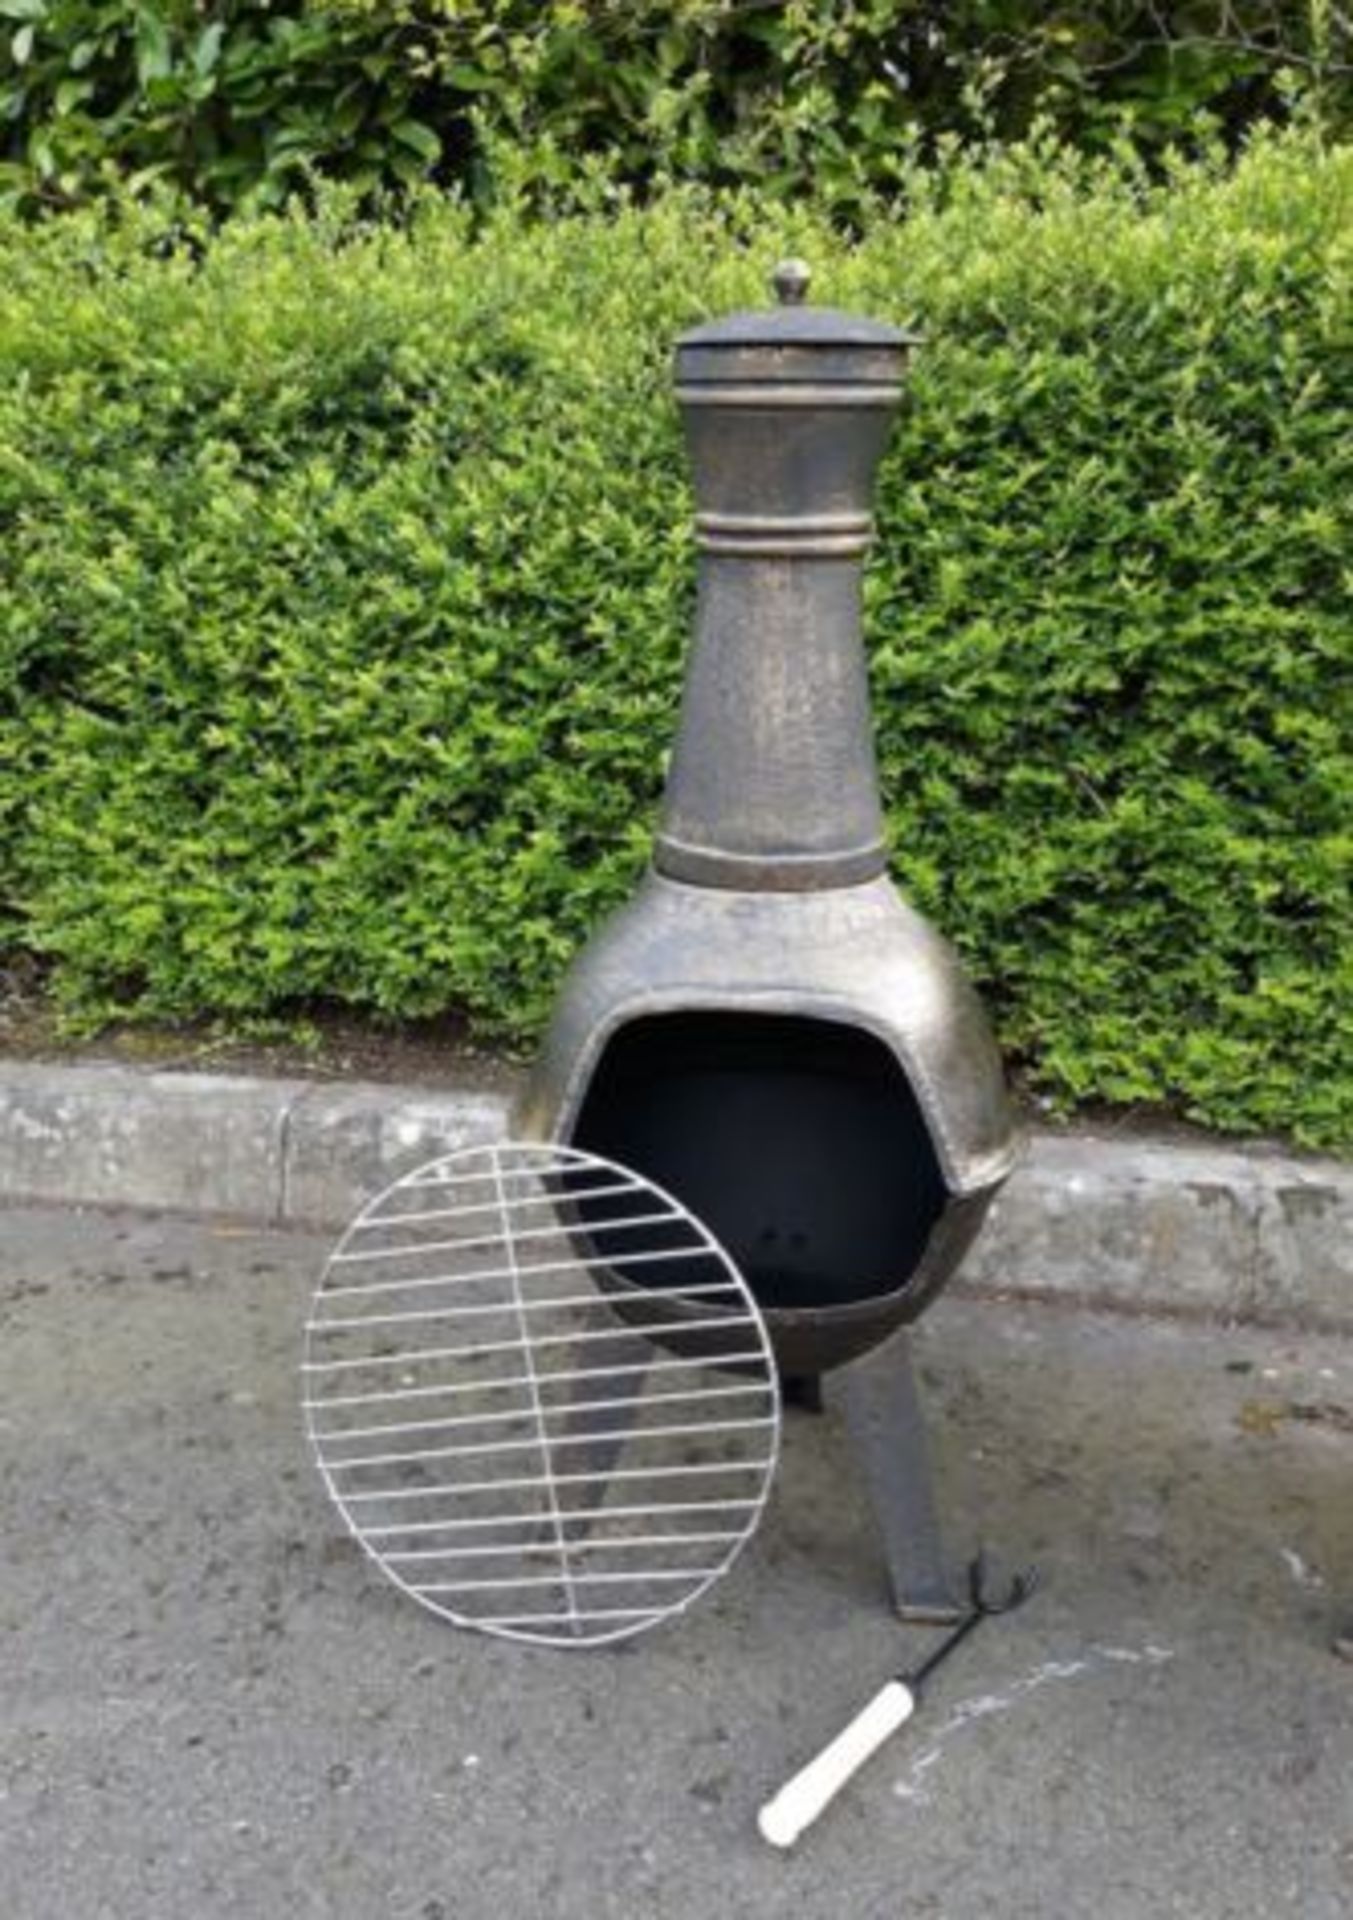 Heavy duty Chiminea finished in Antique Golden Bronze Minimum assembly required Product dimensions - Image 2 of 2